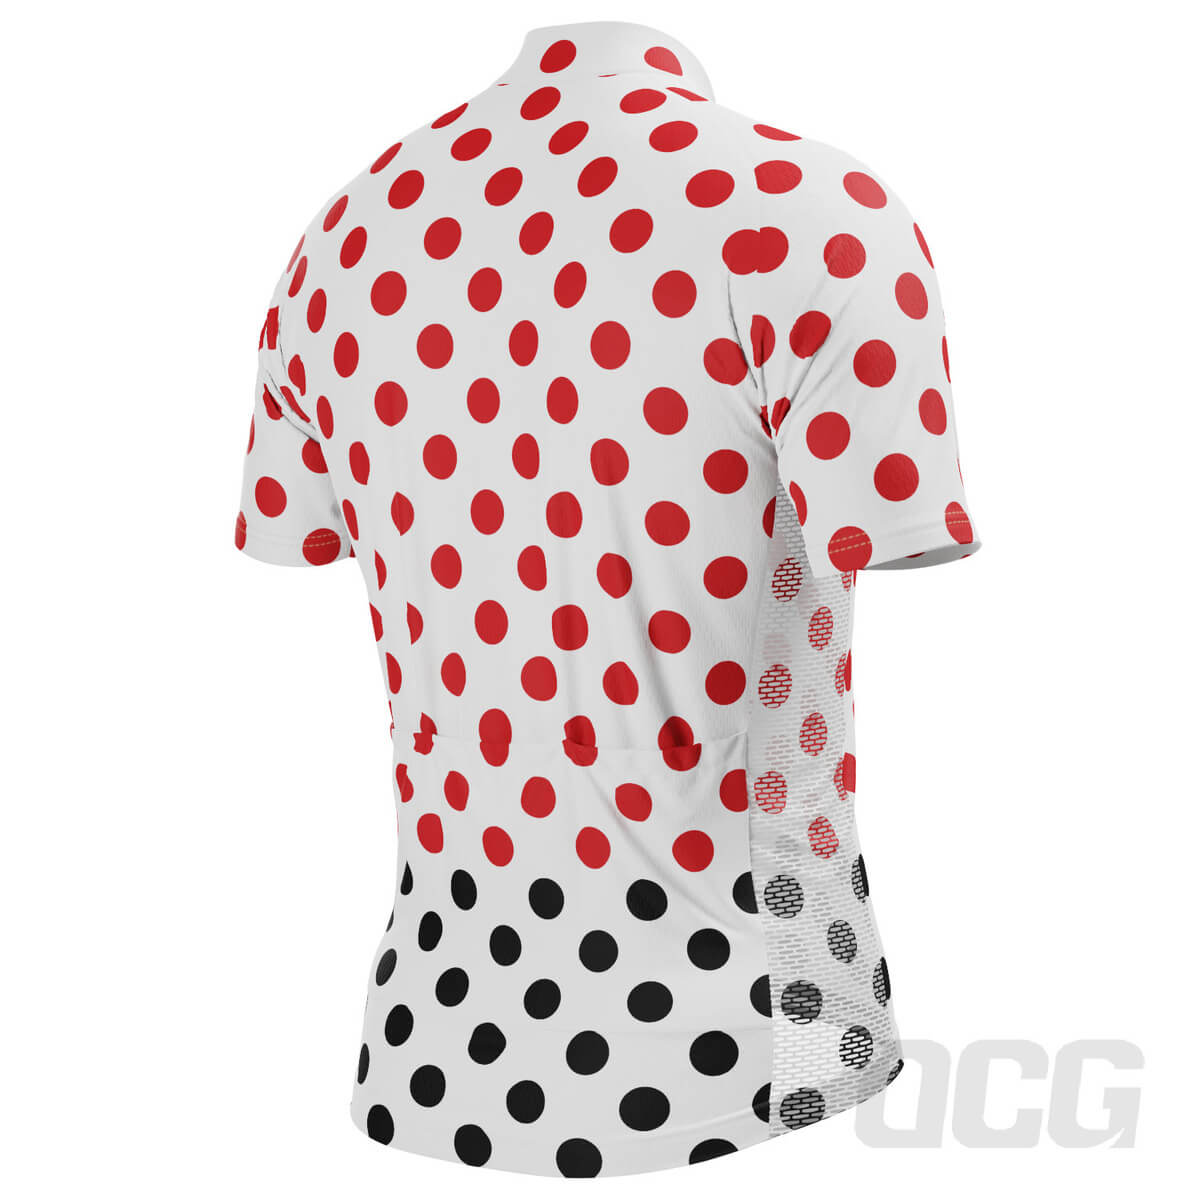 Men's Red Polka Dots on White Short Sleeve Cycling Jersey